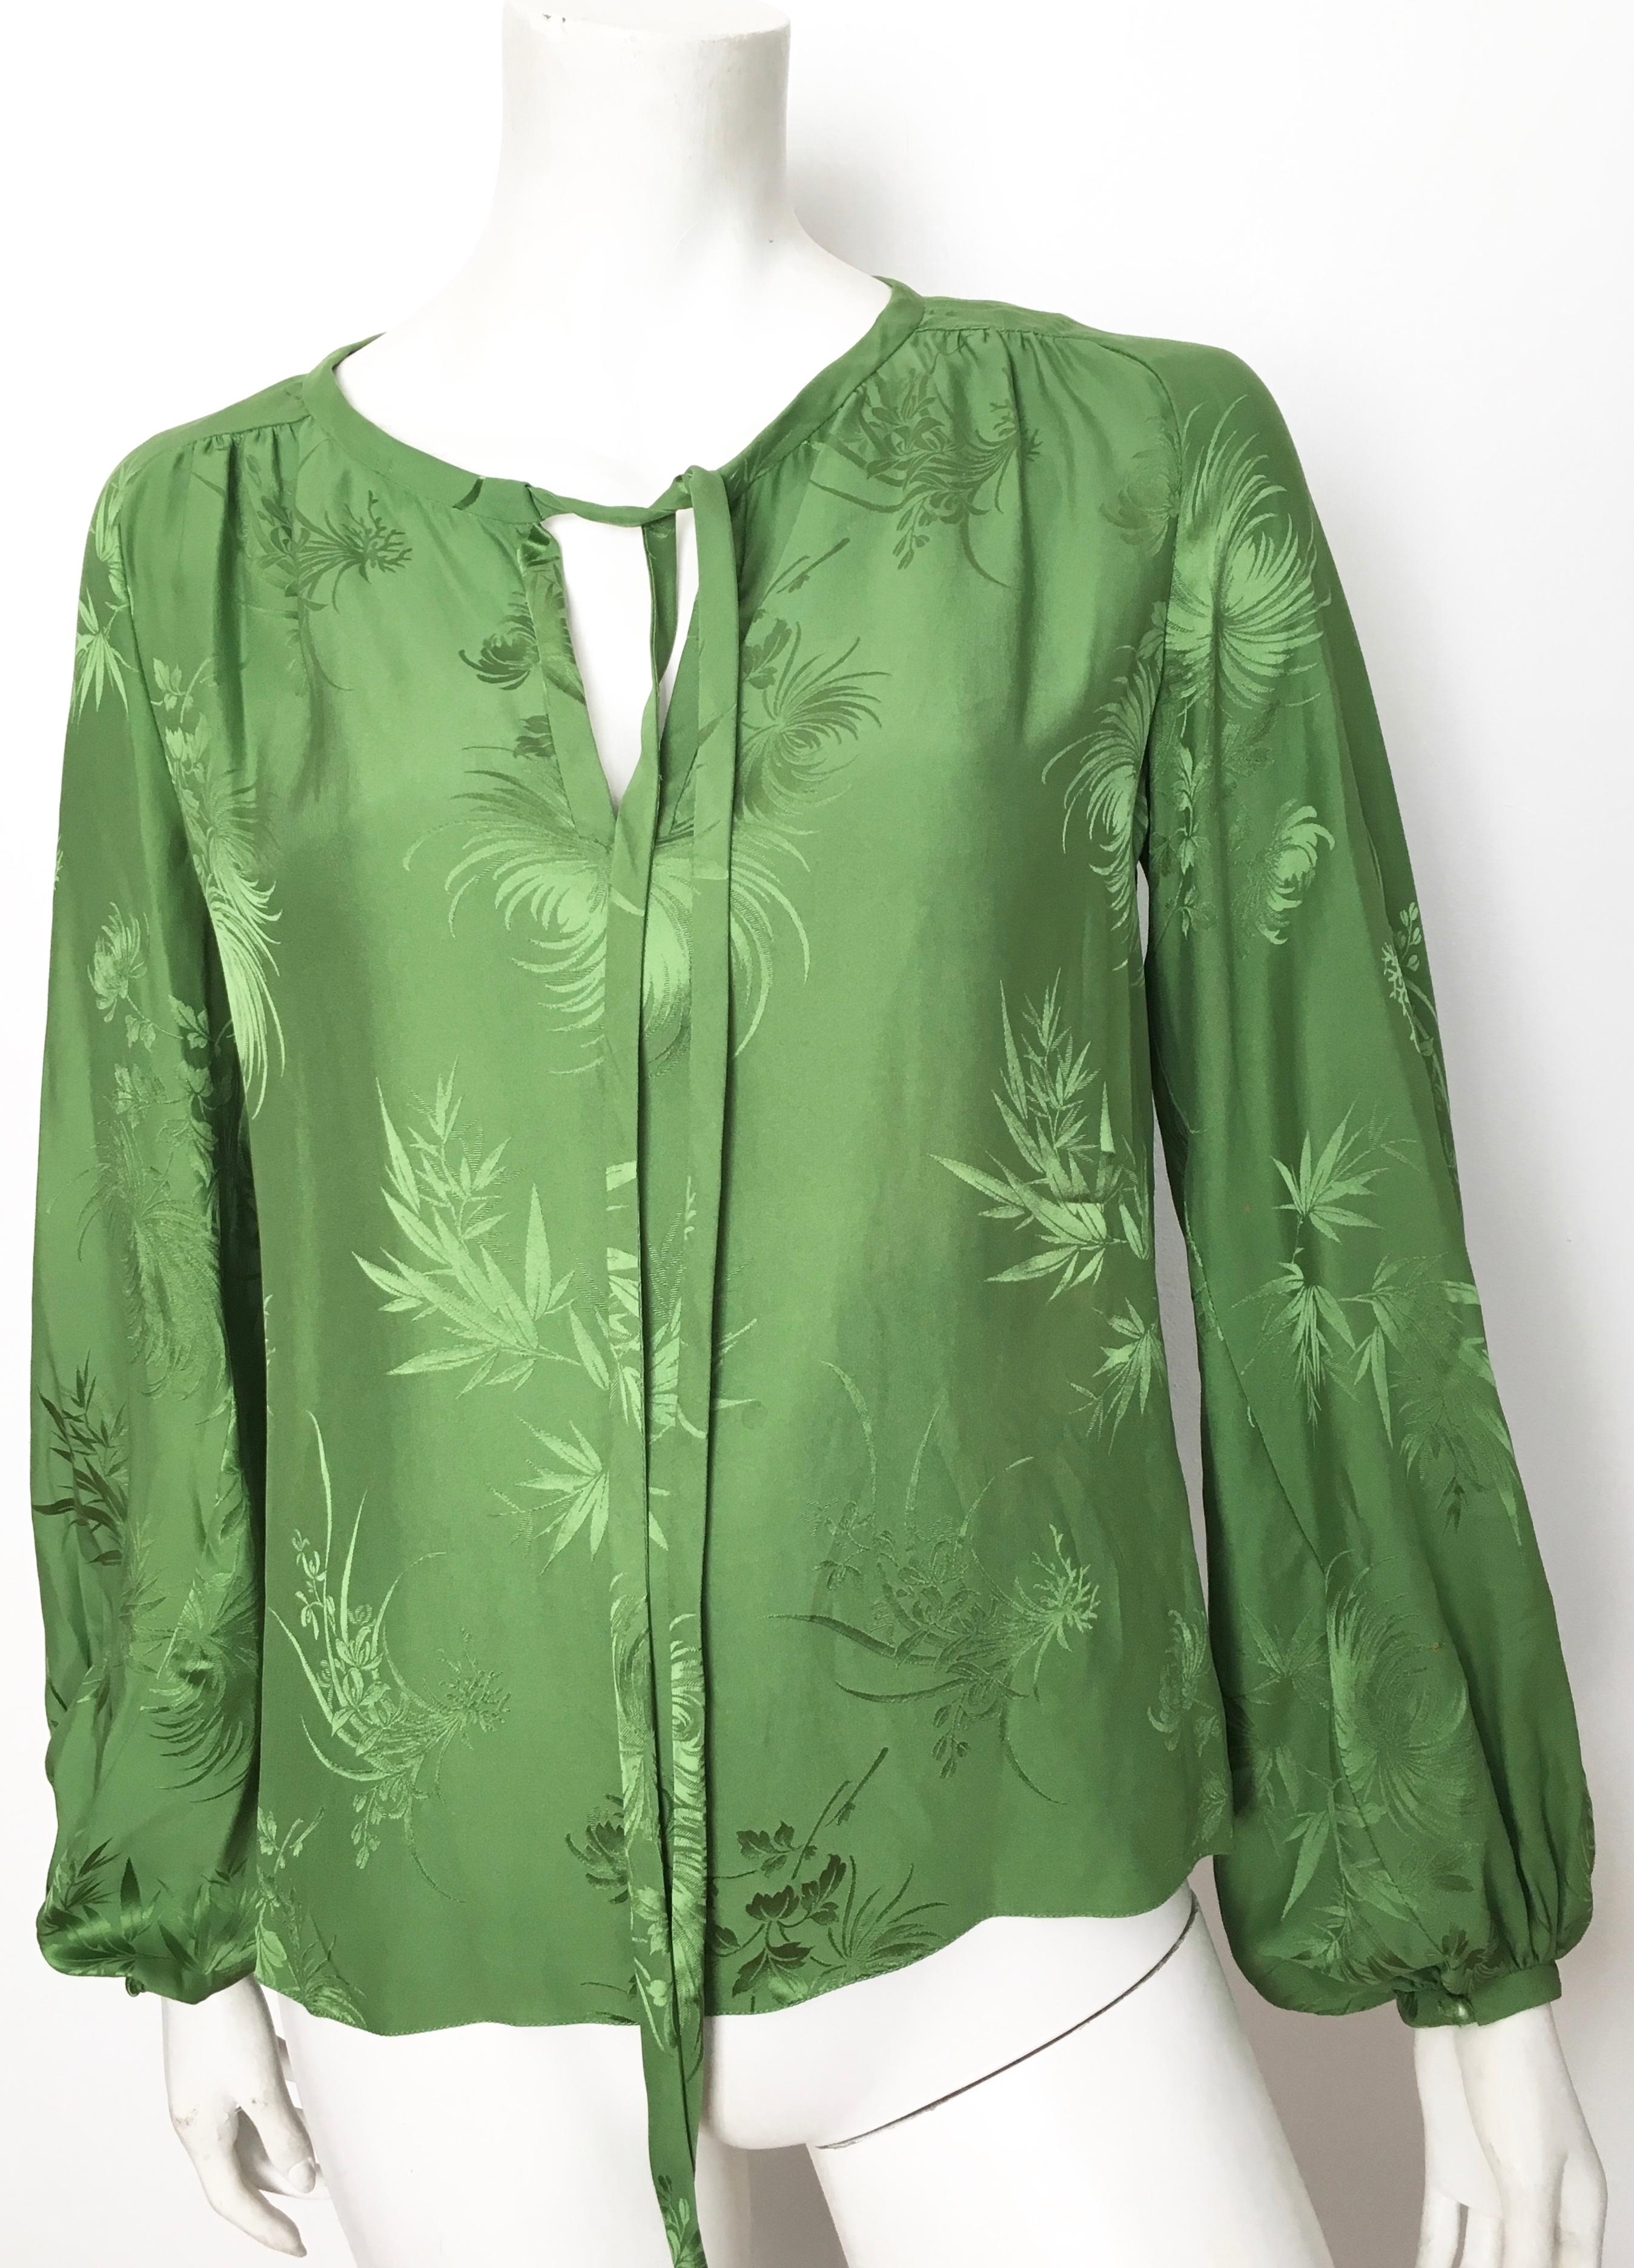 Gray Malcolm Starr 1970s Green Silk Long Sleeve Blouse Size 6/8. For Sale